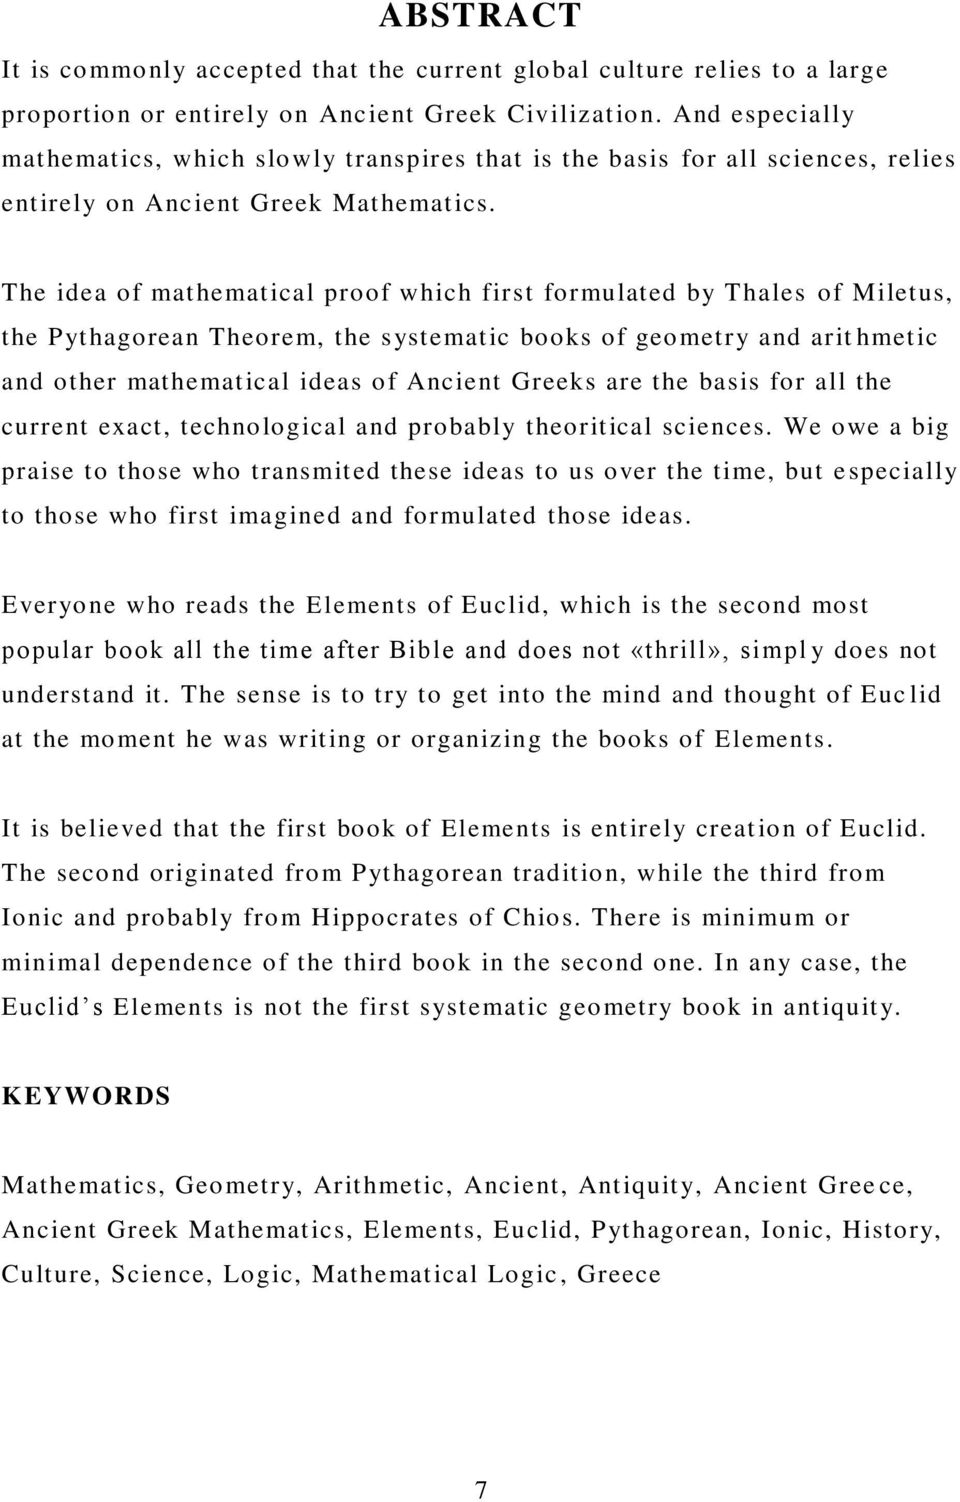 The idea of mathematical proof which first formulated by Thales of Miletus, the Pythagorean Theorem, the systematic books of geometry and arit hmetic and other mathematical ideas of Ancient Greeks